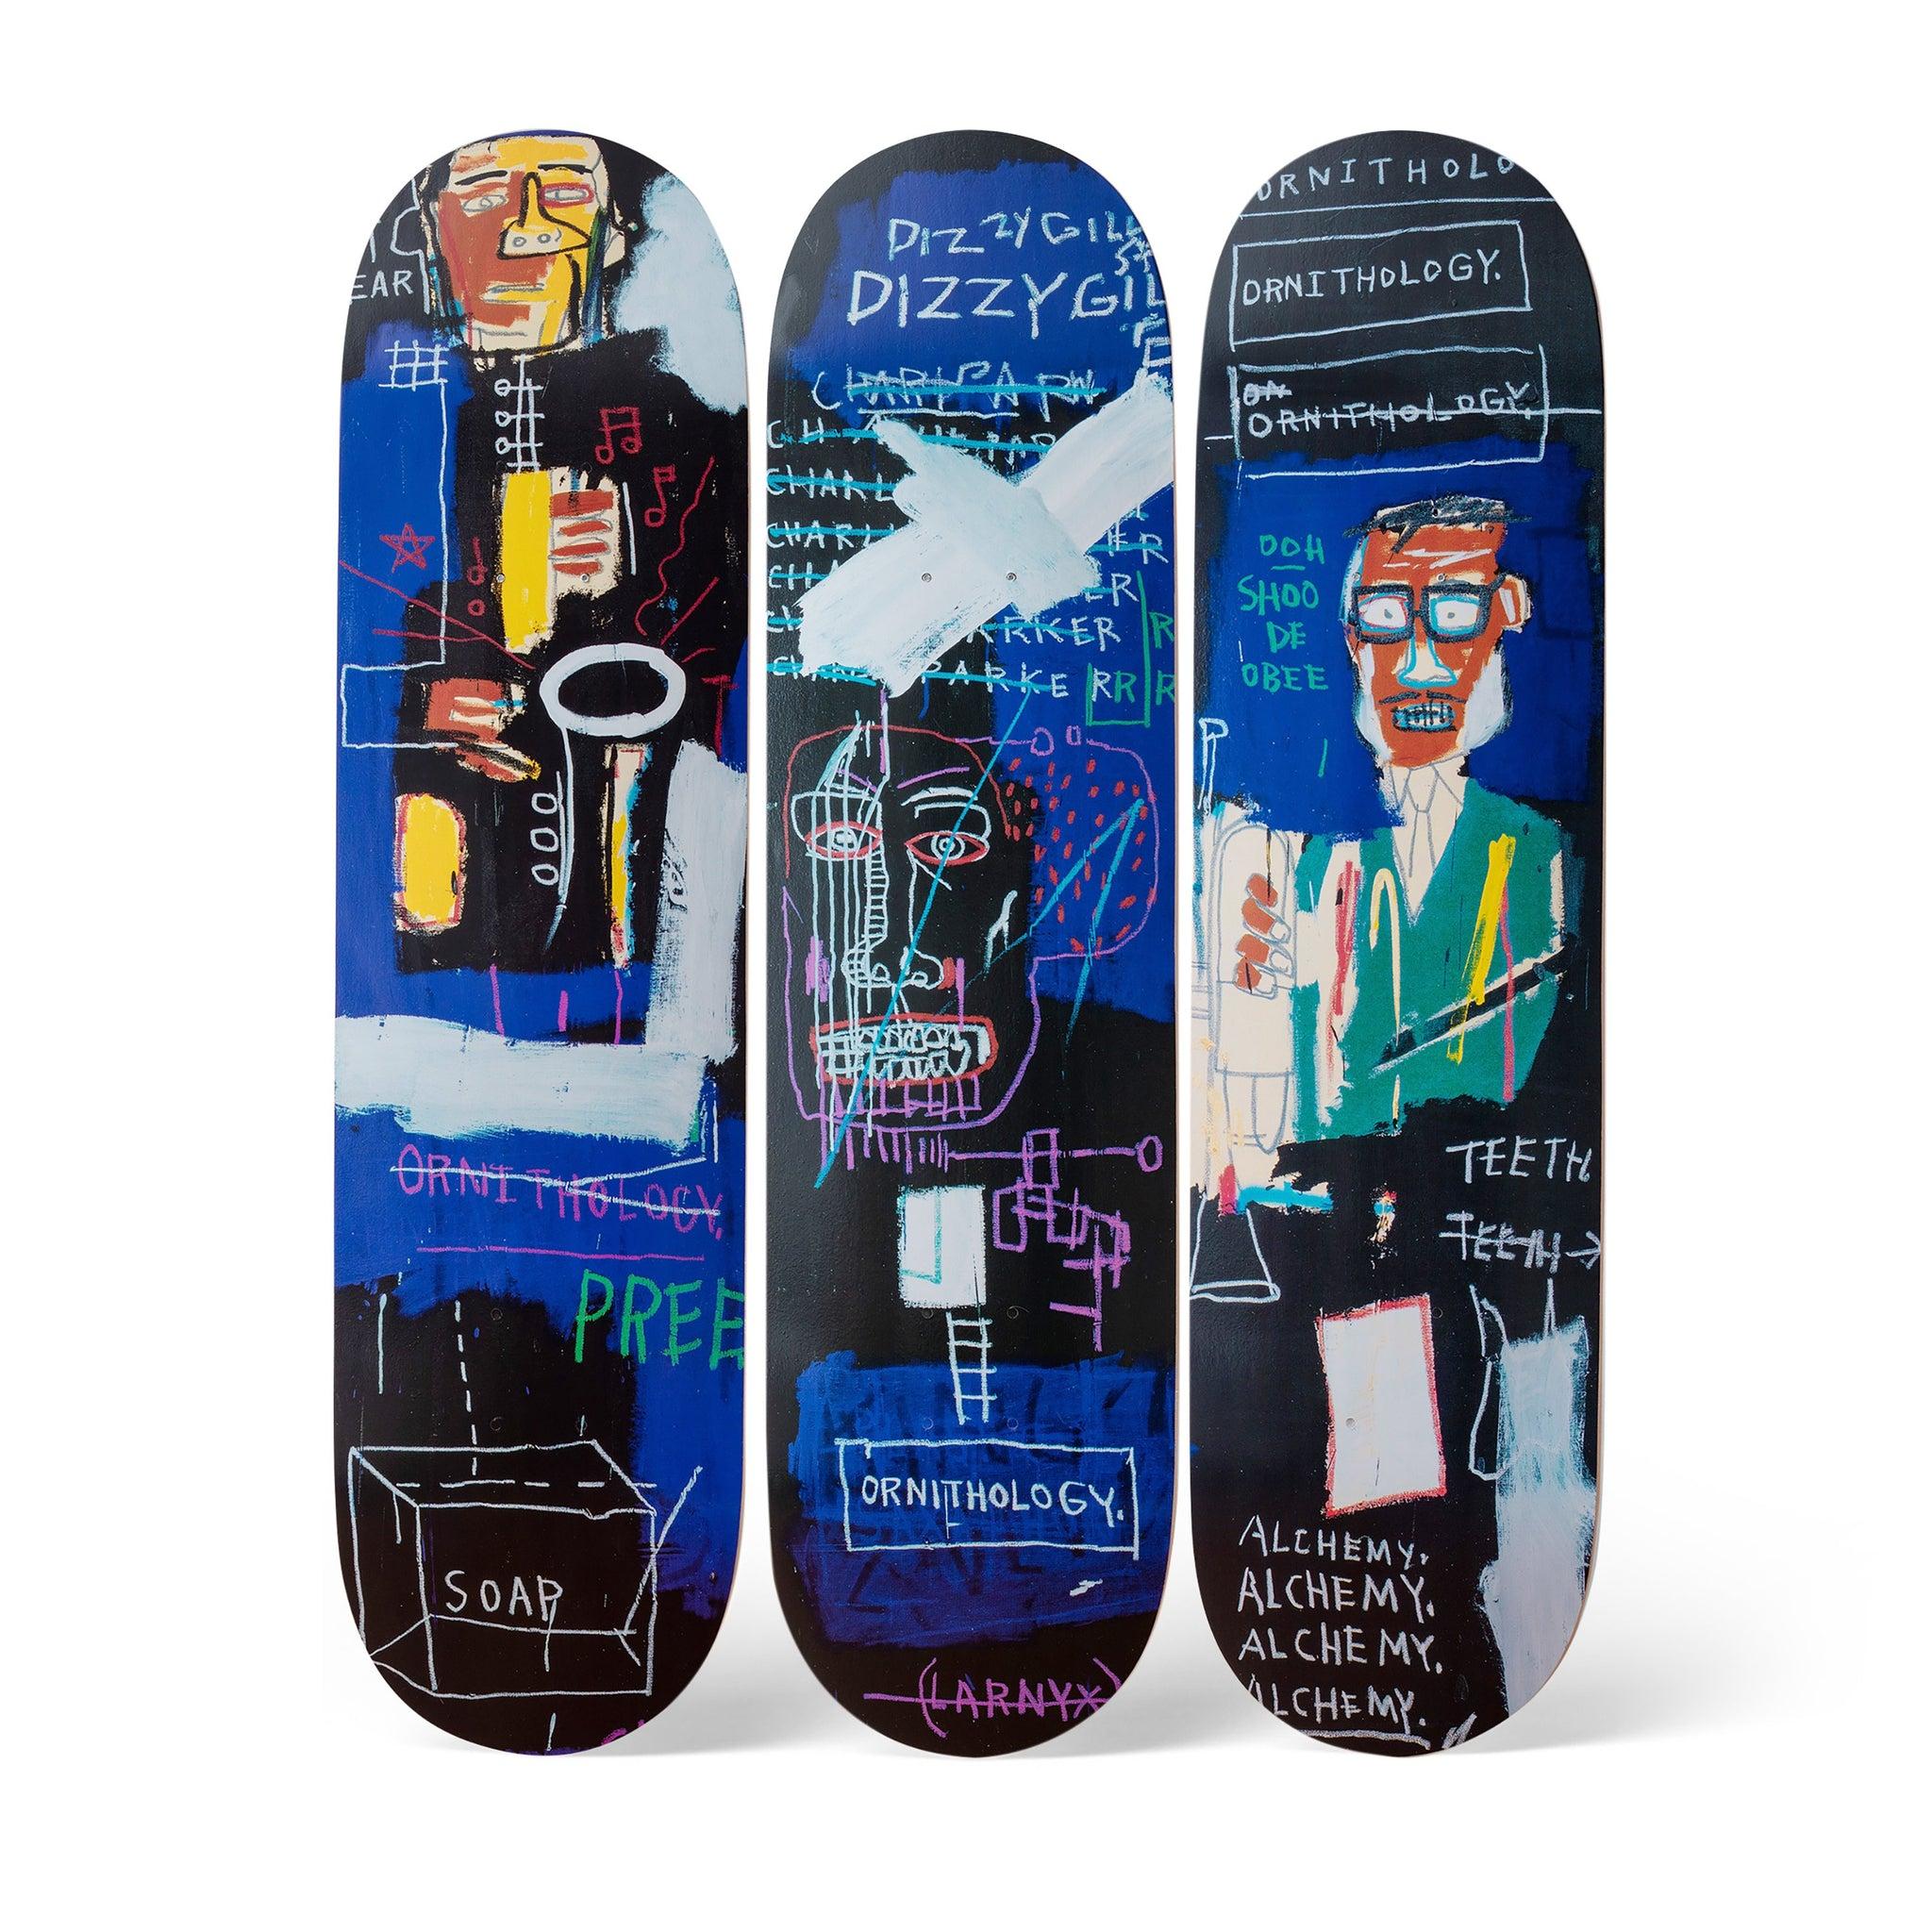 Basquiat Skate Deck Set:
Skateboard Deck Triptych licensed by the Estate of Jean Michel Basquiat in conjunction with Artestar c. 2017, featuring offset imagery of the much iconic early eighties work, Basquiat 